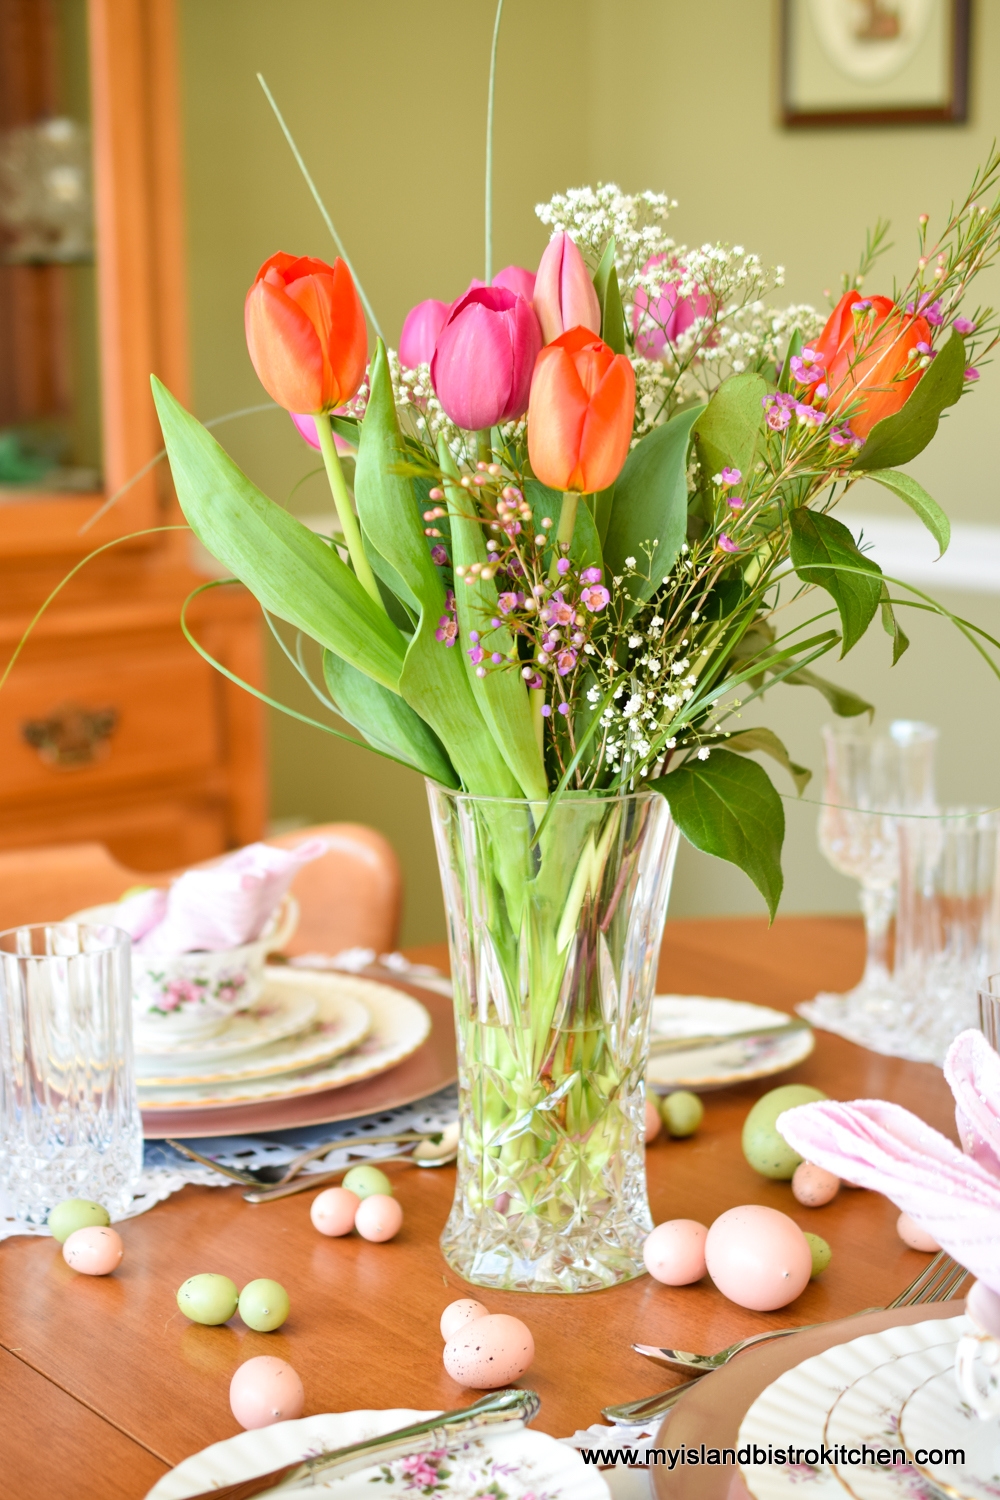 Large glass vase filled with bright pink and orange tulips in the center of a table